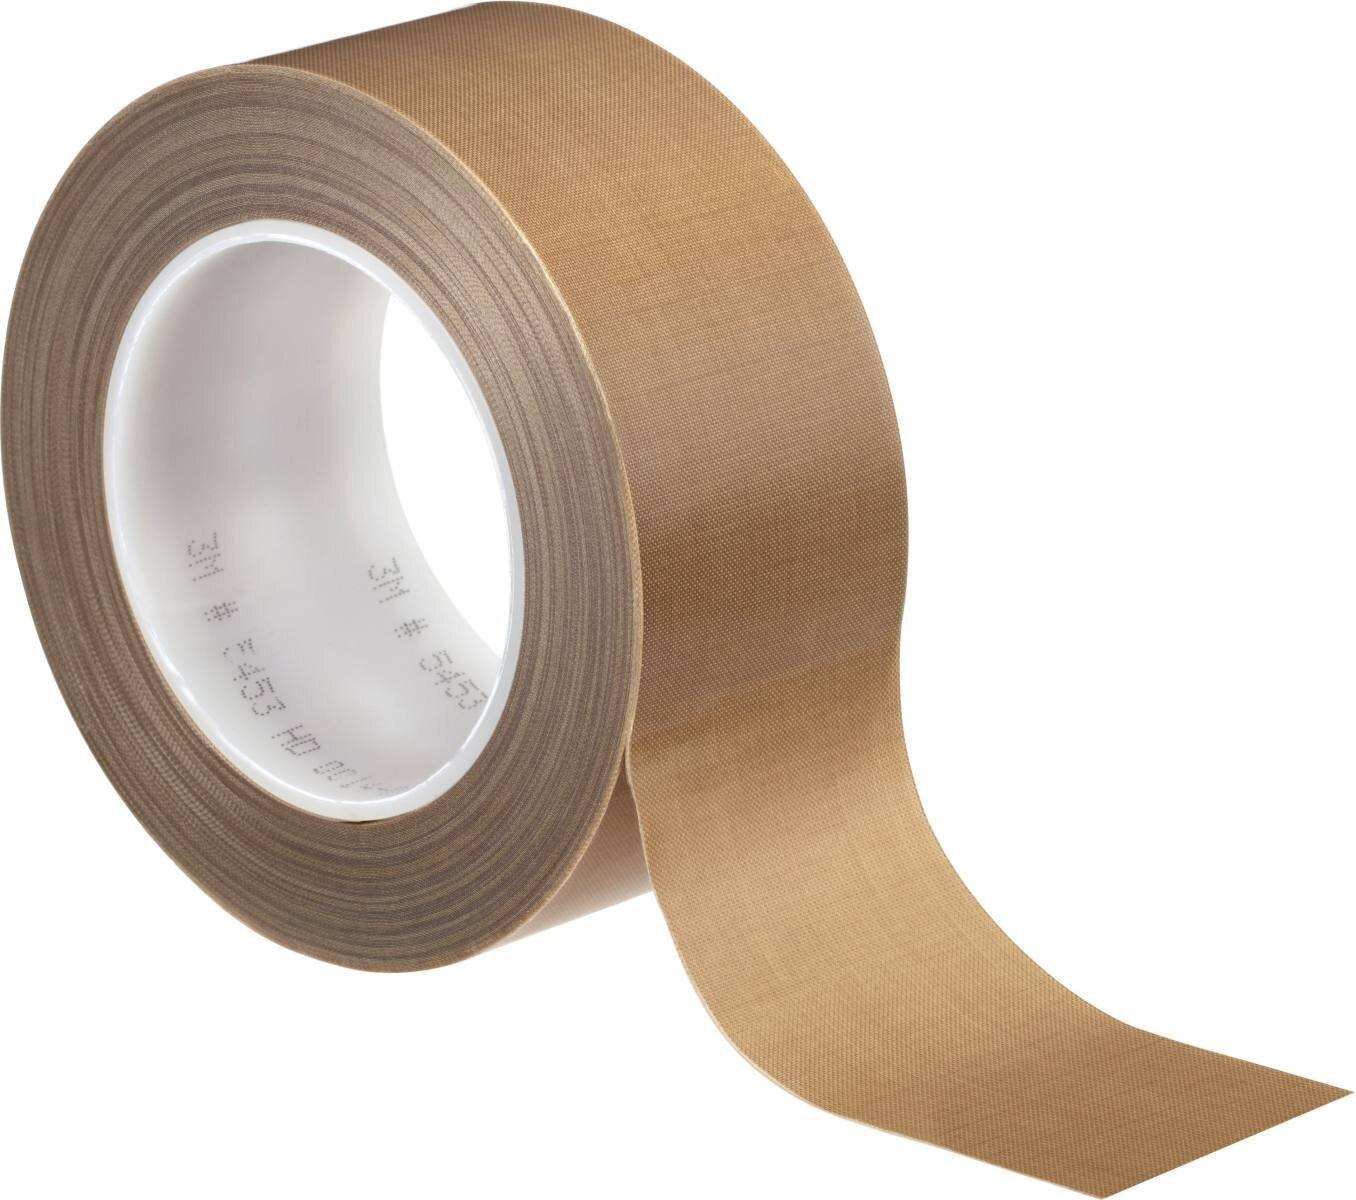 3M 5453 PTFE glass adhesive tape 25mmx33m, 0.22mm, silicone